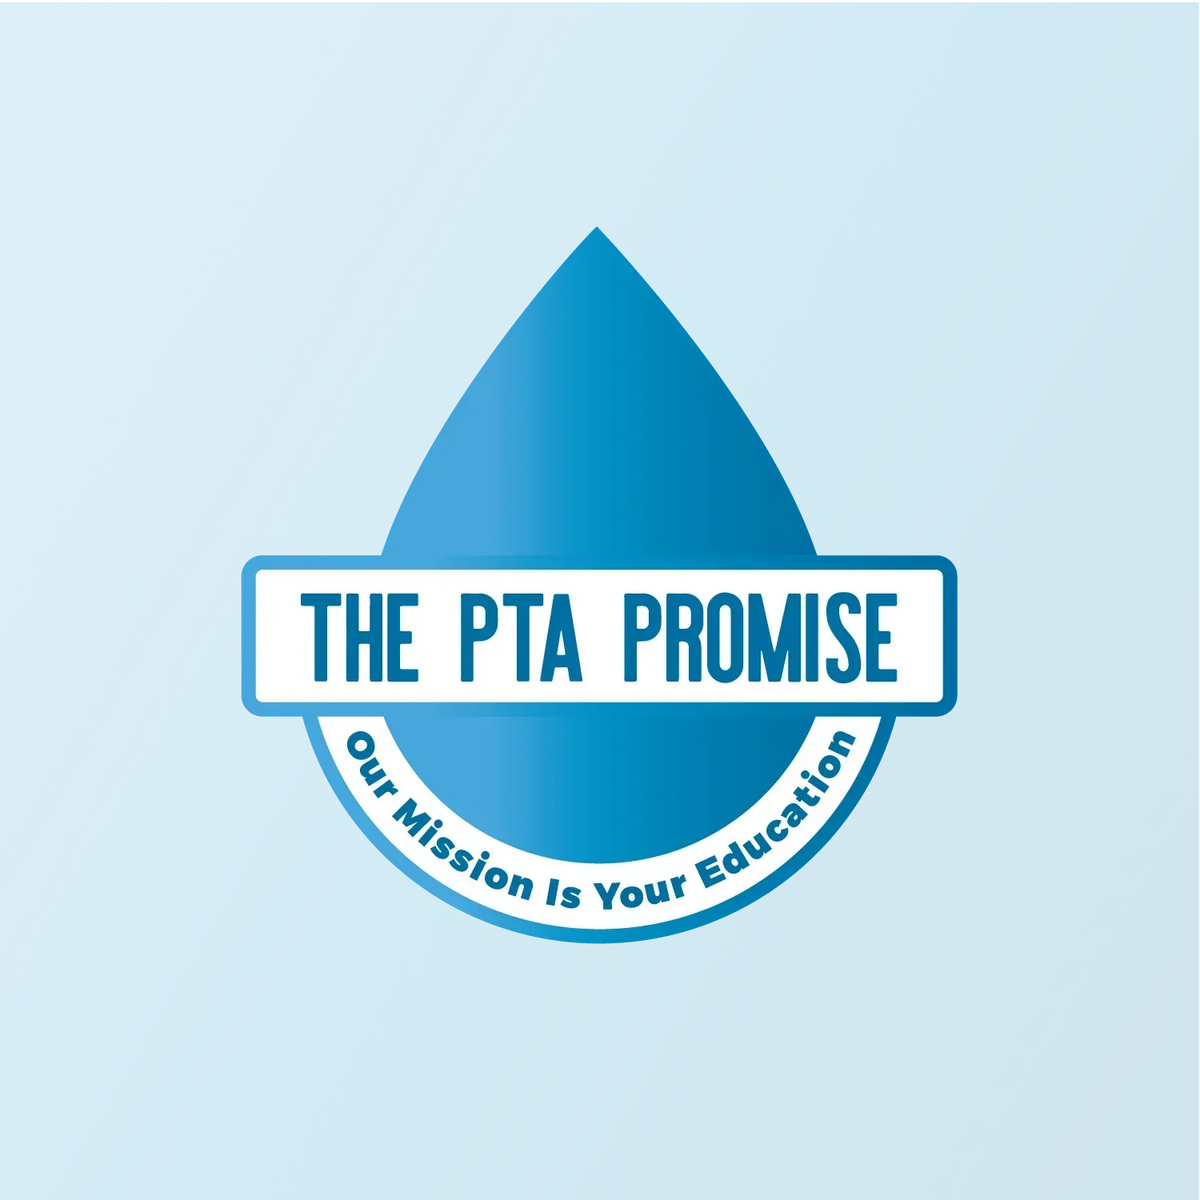 The PTA Promise, Our Mission Is Your Education, Pool Training Academy Reviews Promise Motto